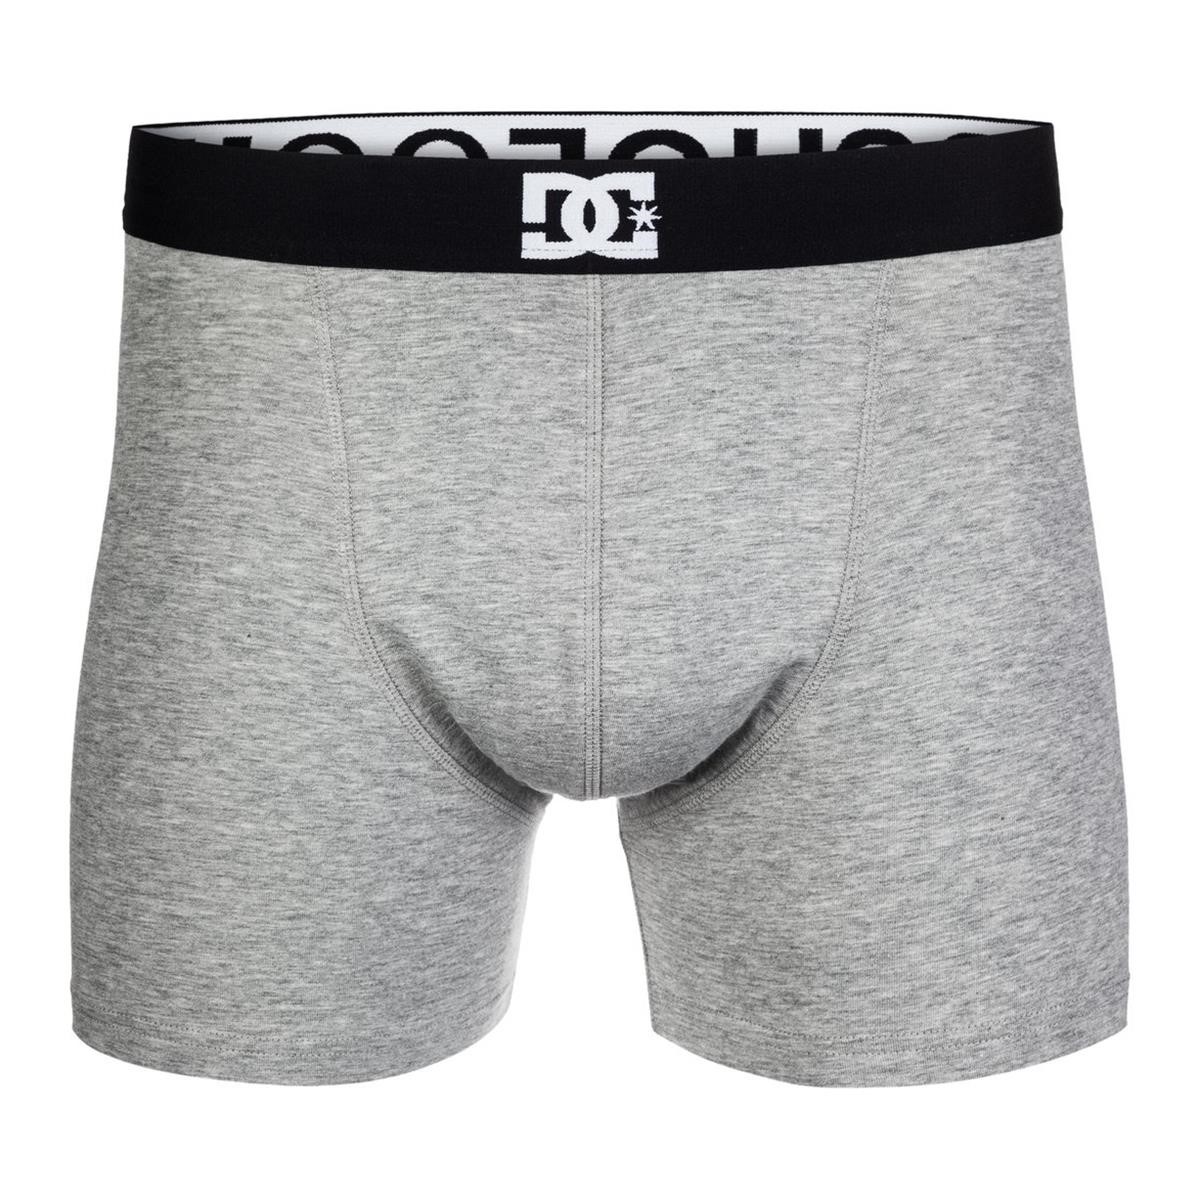 DC Boxers Woolsey Heather Gray